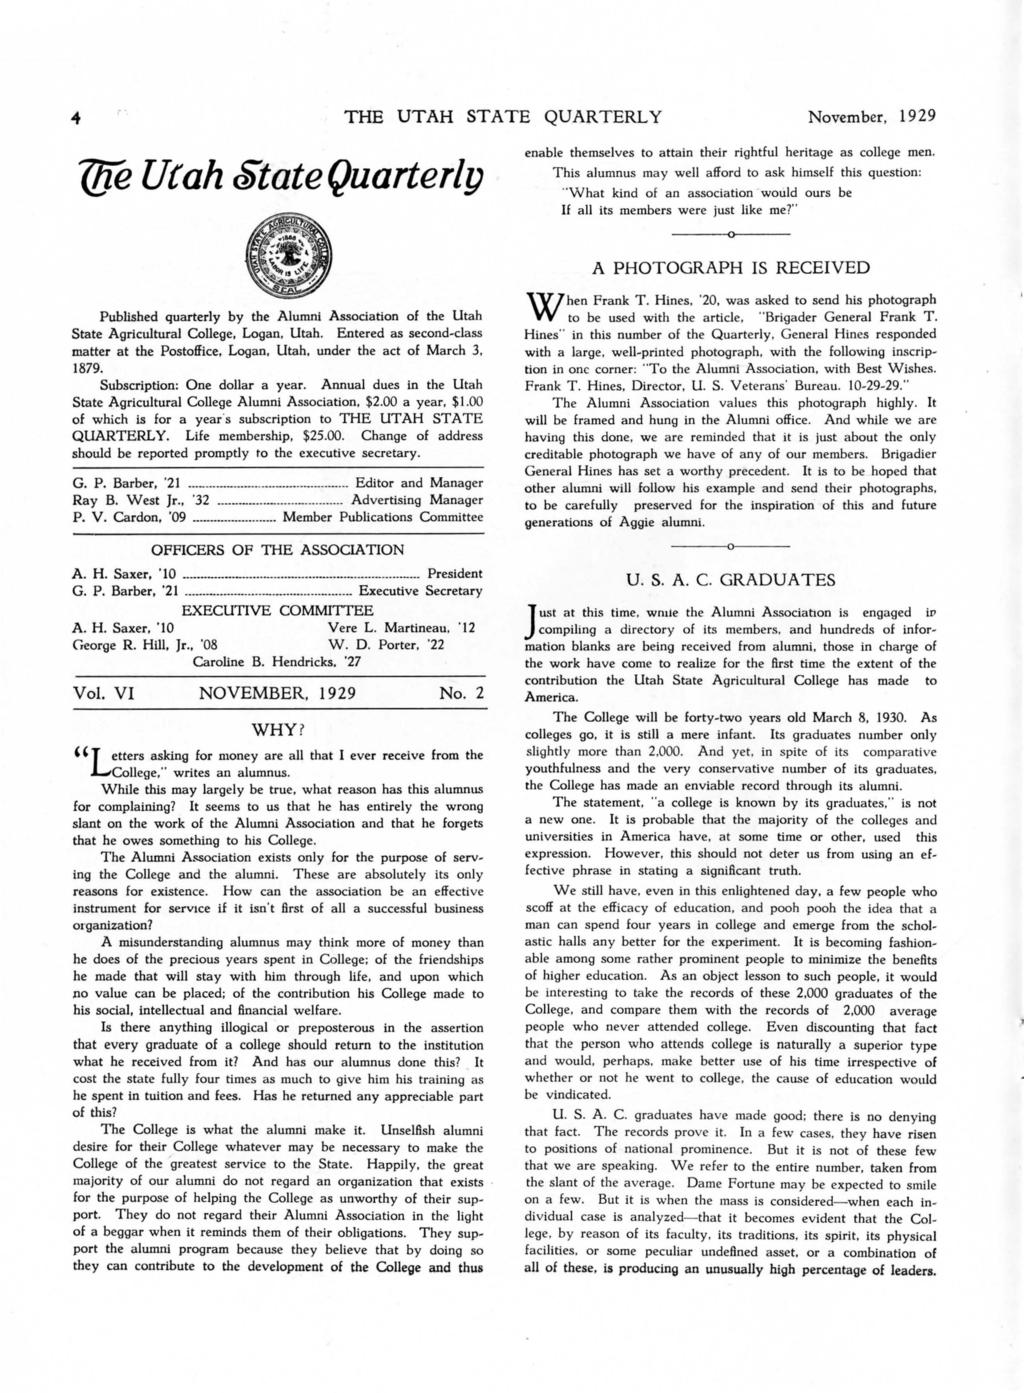 (ffe Utah c$'tatequarterlg THE UTAH STATE QUARTERLY November, 1929 enable themselves to attan ther rghtful hertage as college men.